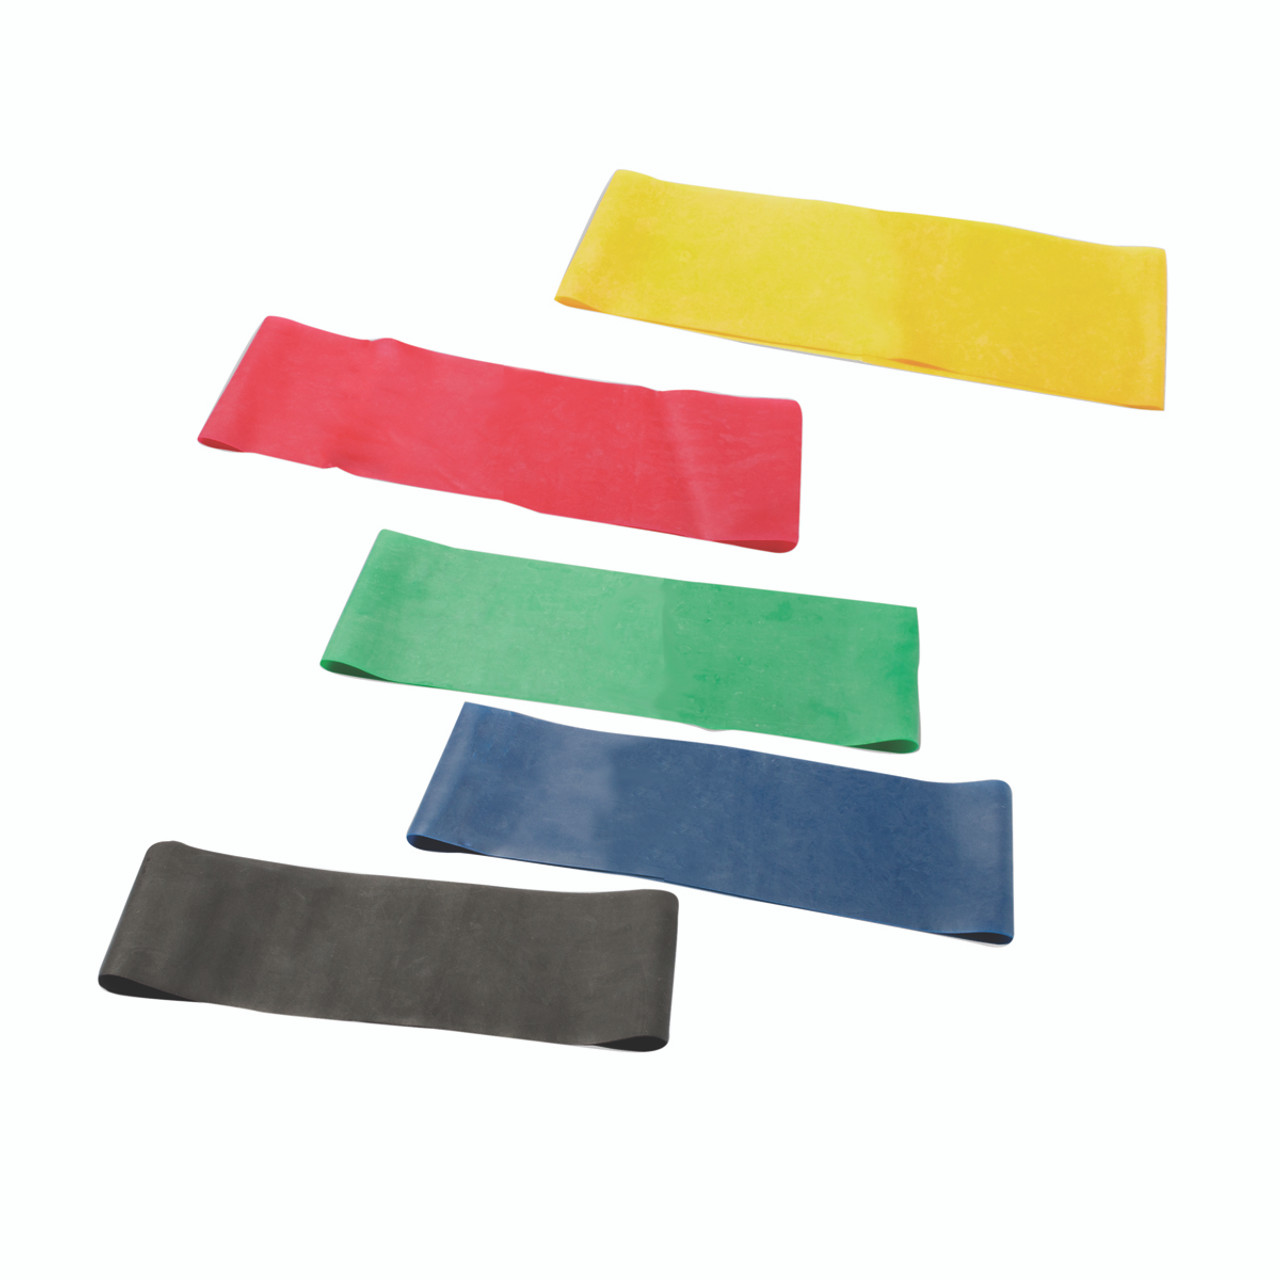 CanDo¨ Band Exercise Loop - 5-piece set (10"), (1 each: yellow, red, green, blue, black), 10 sets